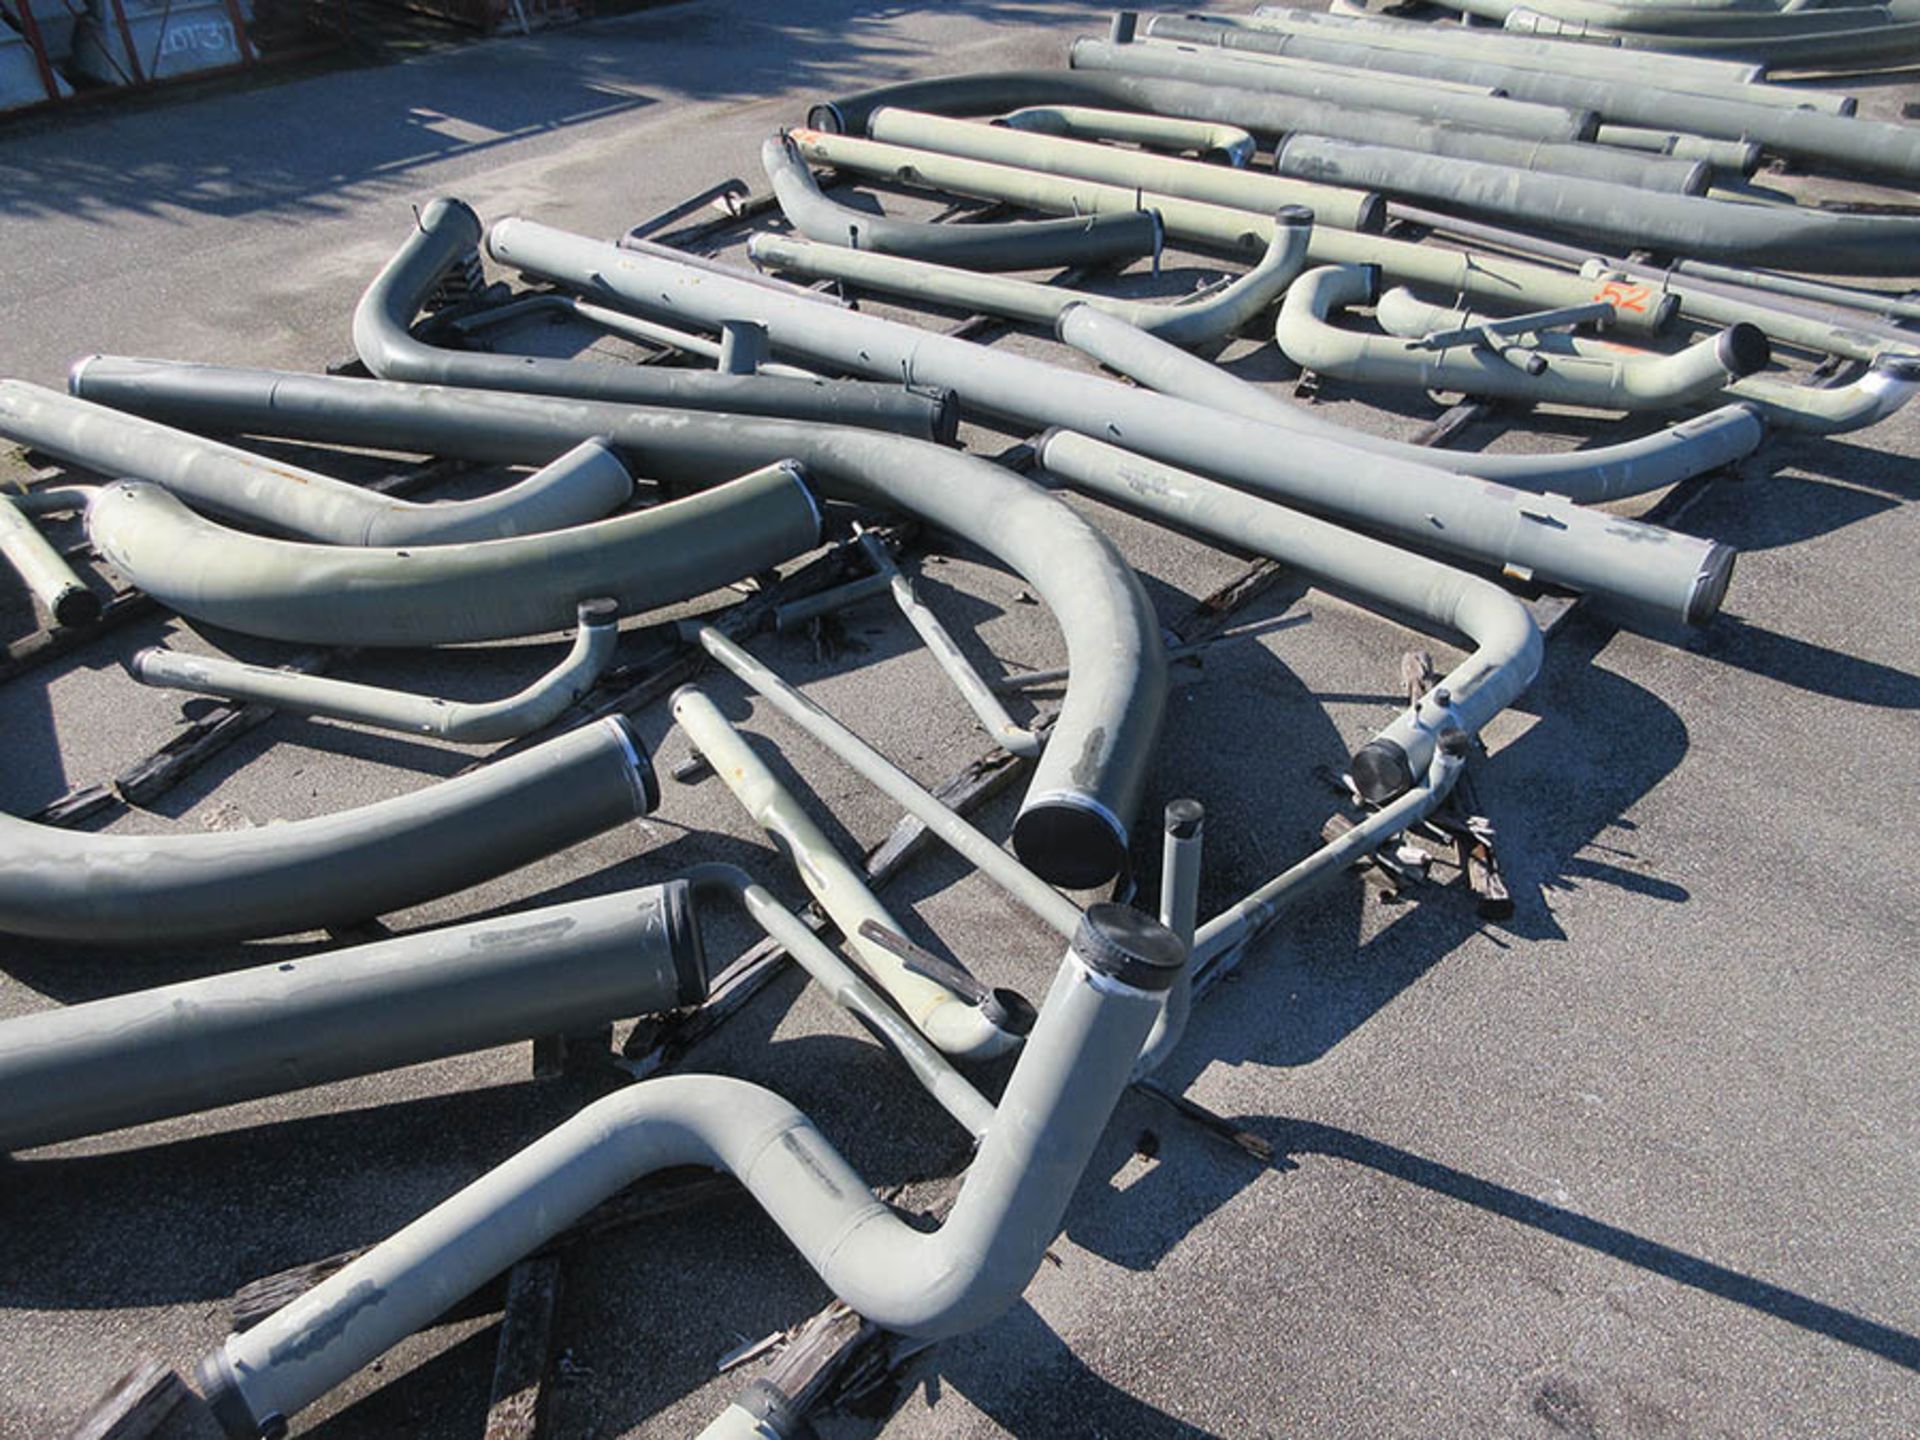 LARGE LOT OF ASSORTED PIPE: 6'' TO 30'' DIA. UP TO 576'', 1,000 LB. - 37,193 LB., LOCATION: GRID 4D - Image 3 of 3